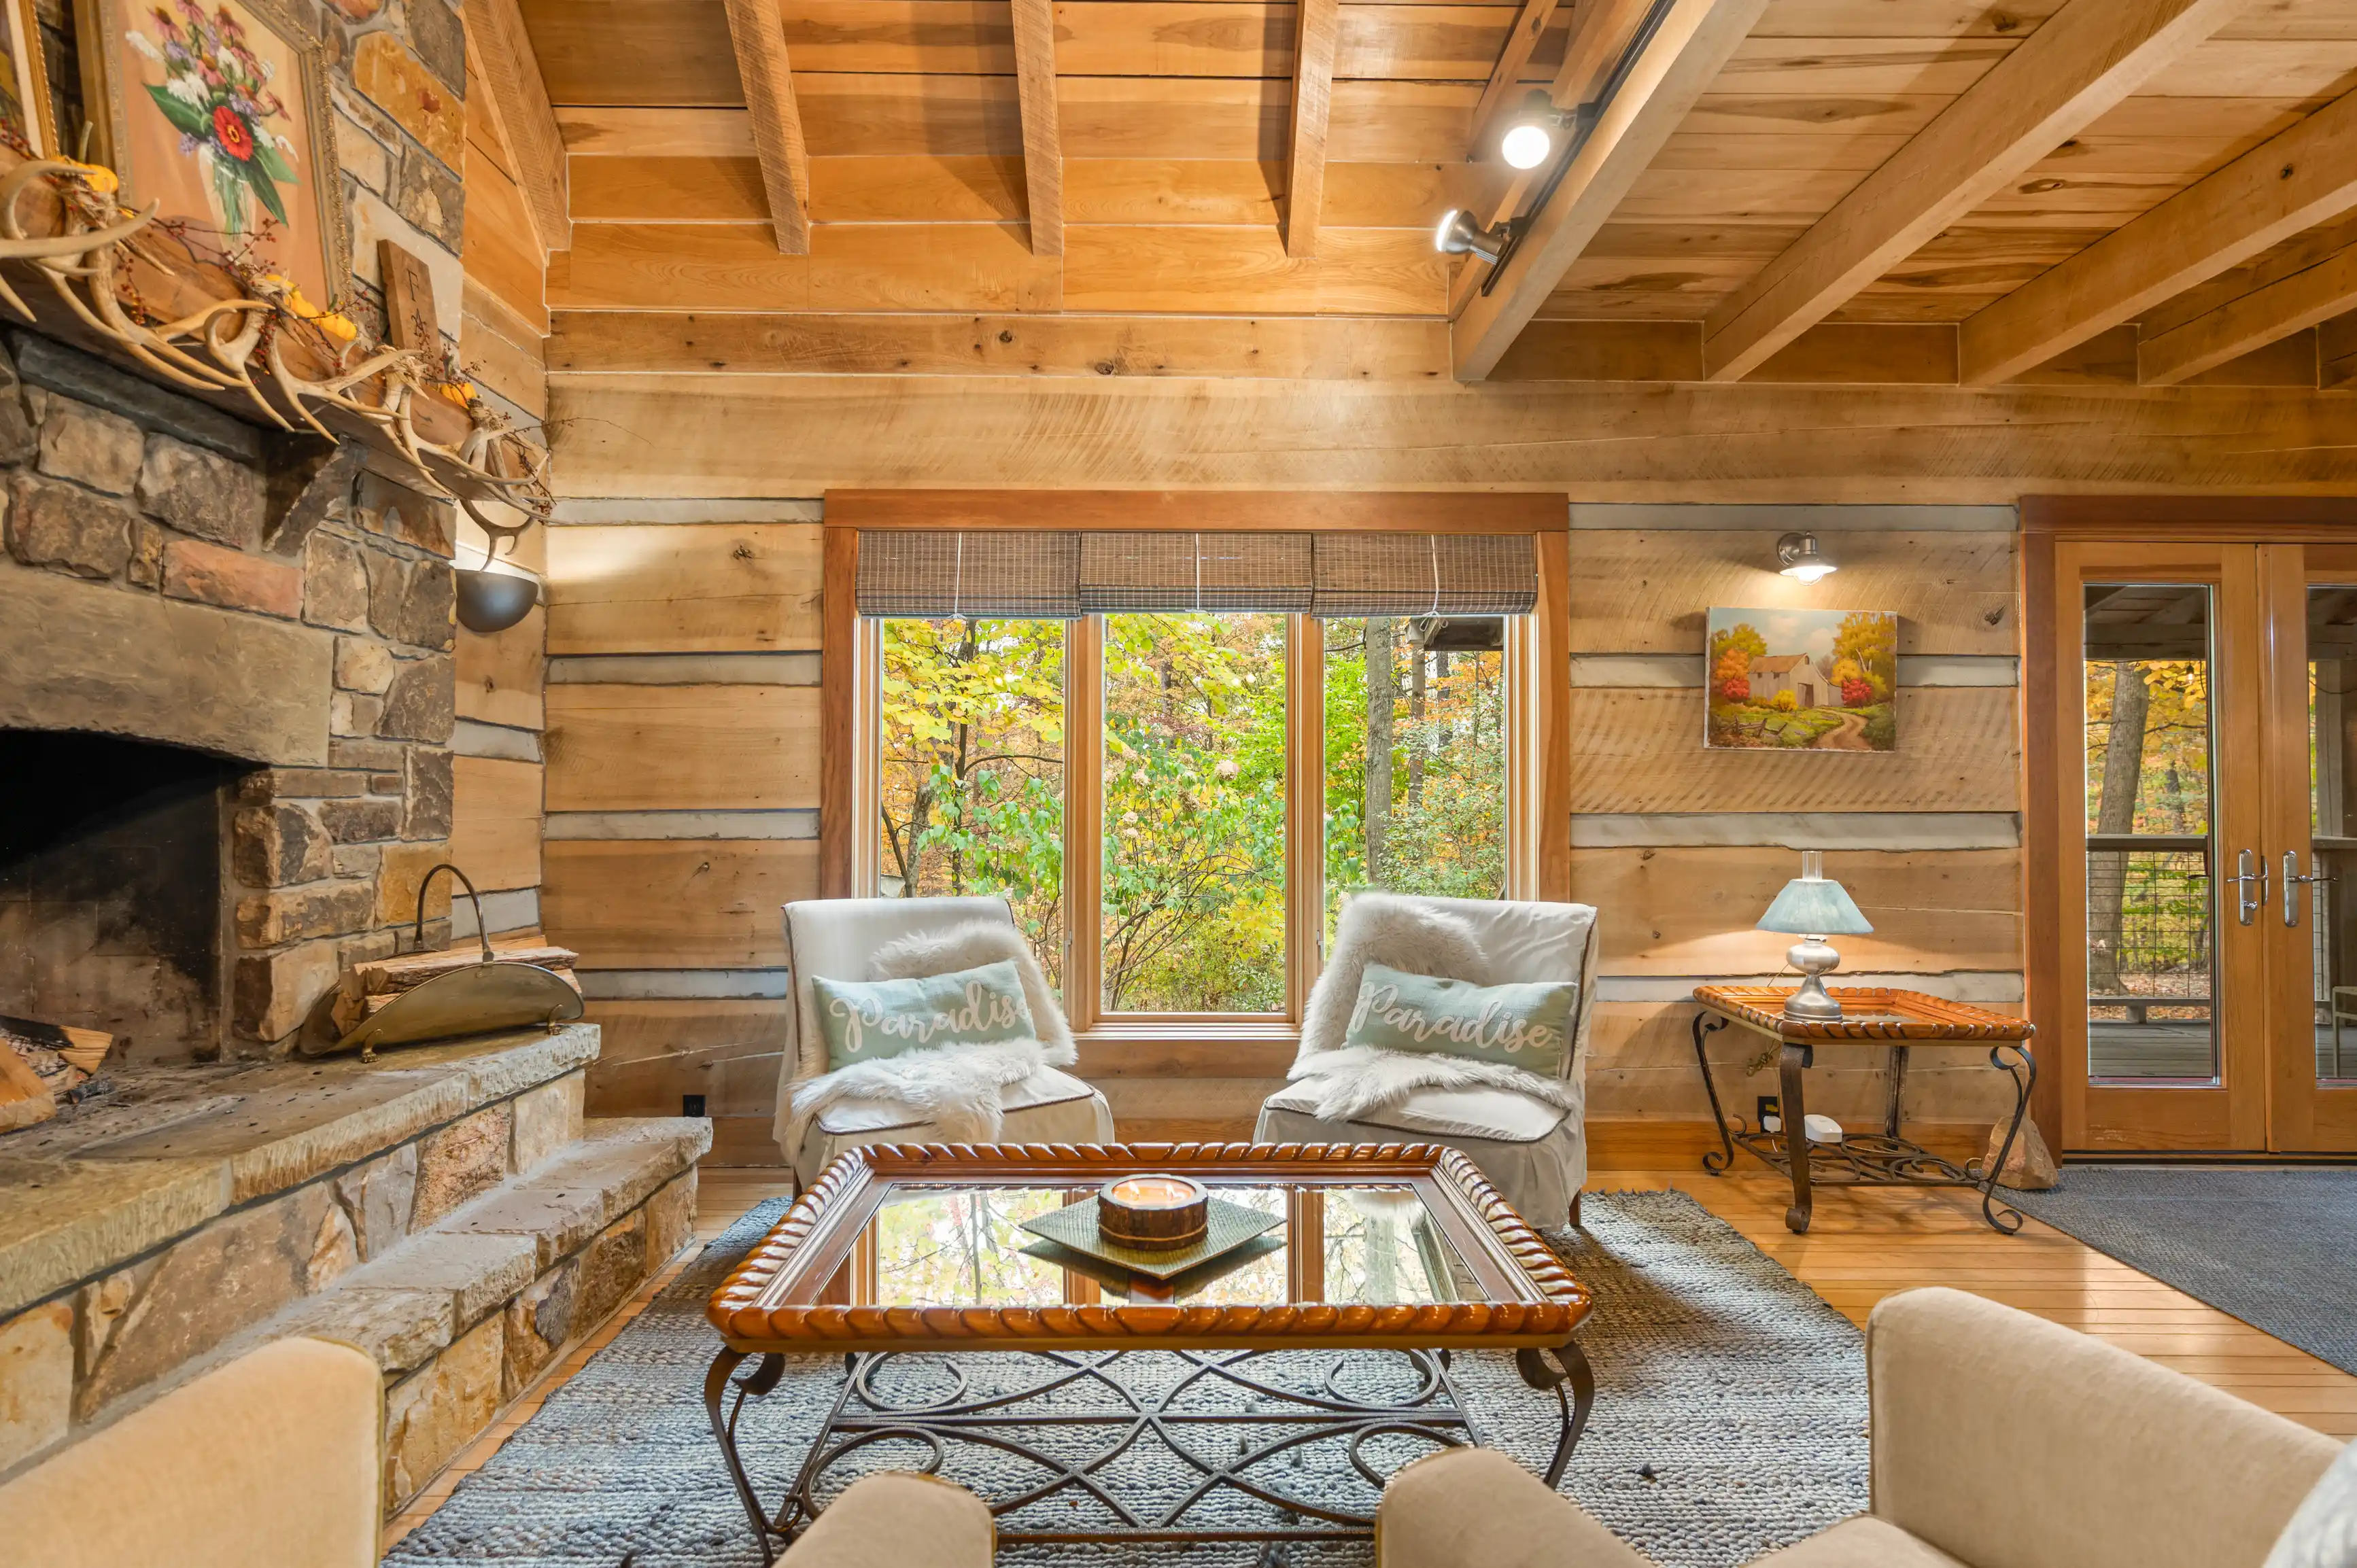 Cozy cabin interior with a stone fireplace, wooden walls, exposed beams, and a view of the autumn trees through a large window.